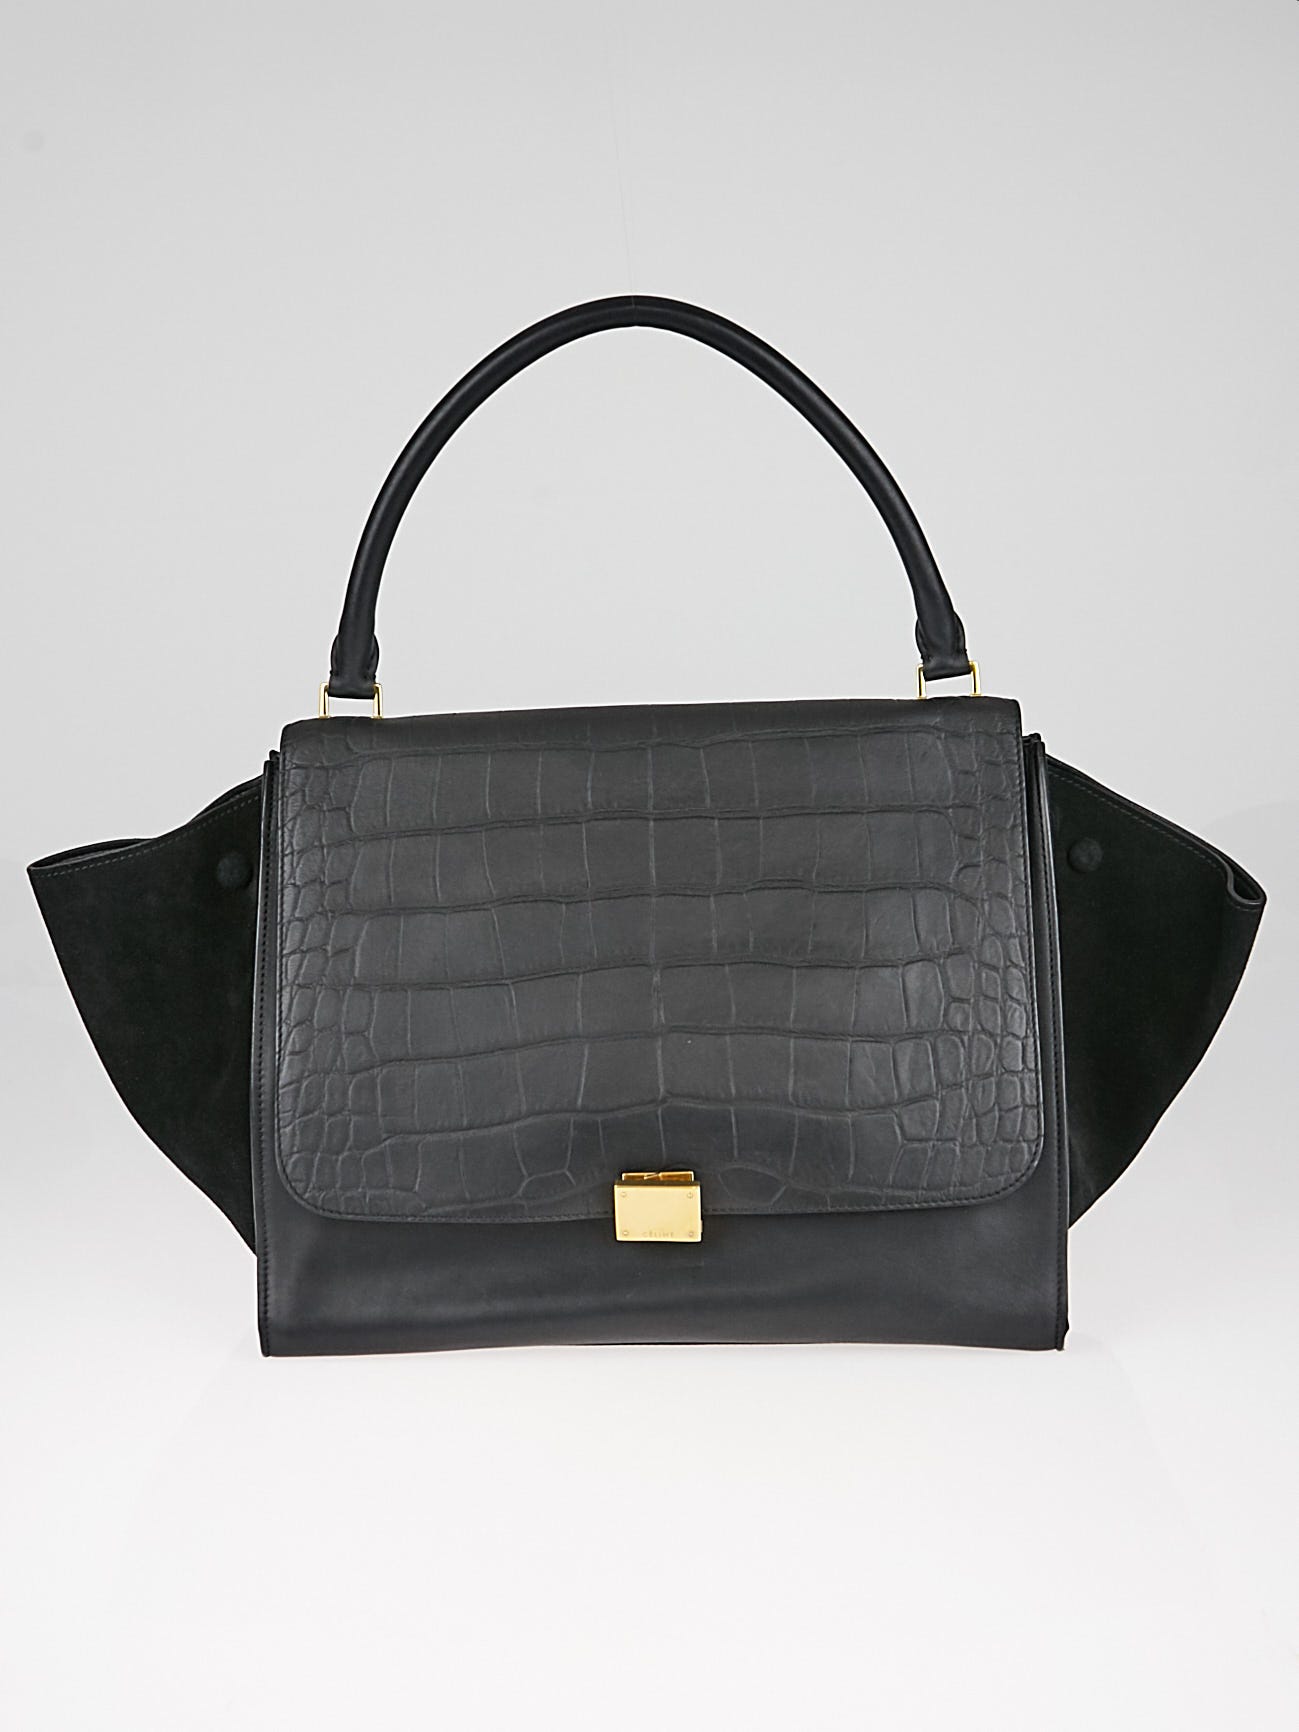 Celine Black Crocodile Embossed Leather and Suede Small Trapeze Bag